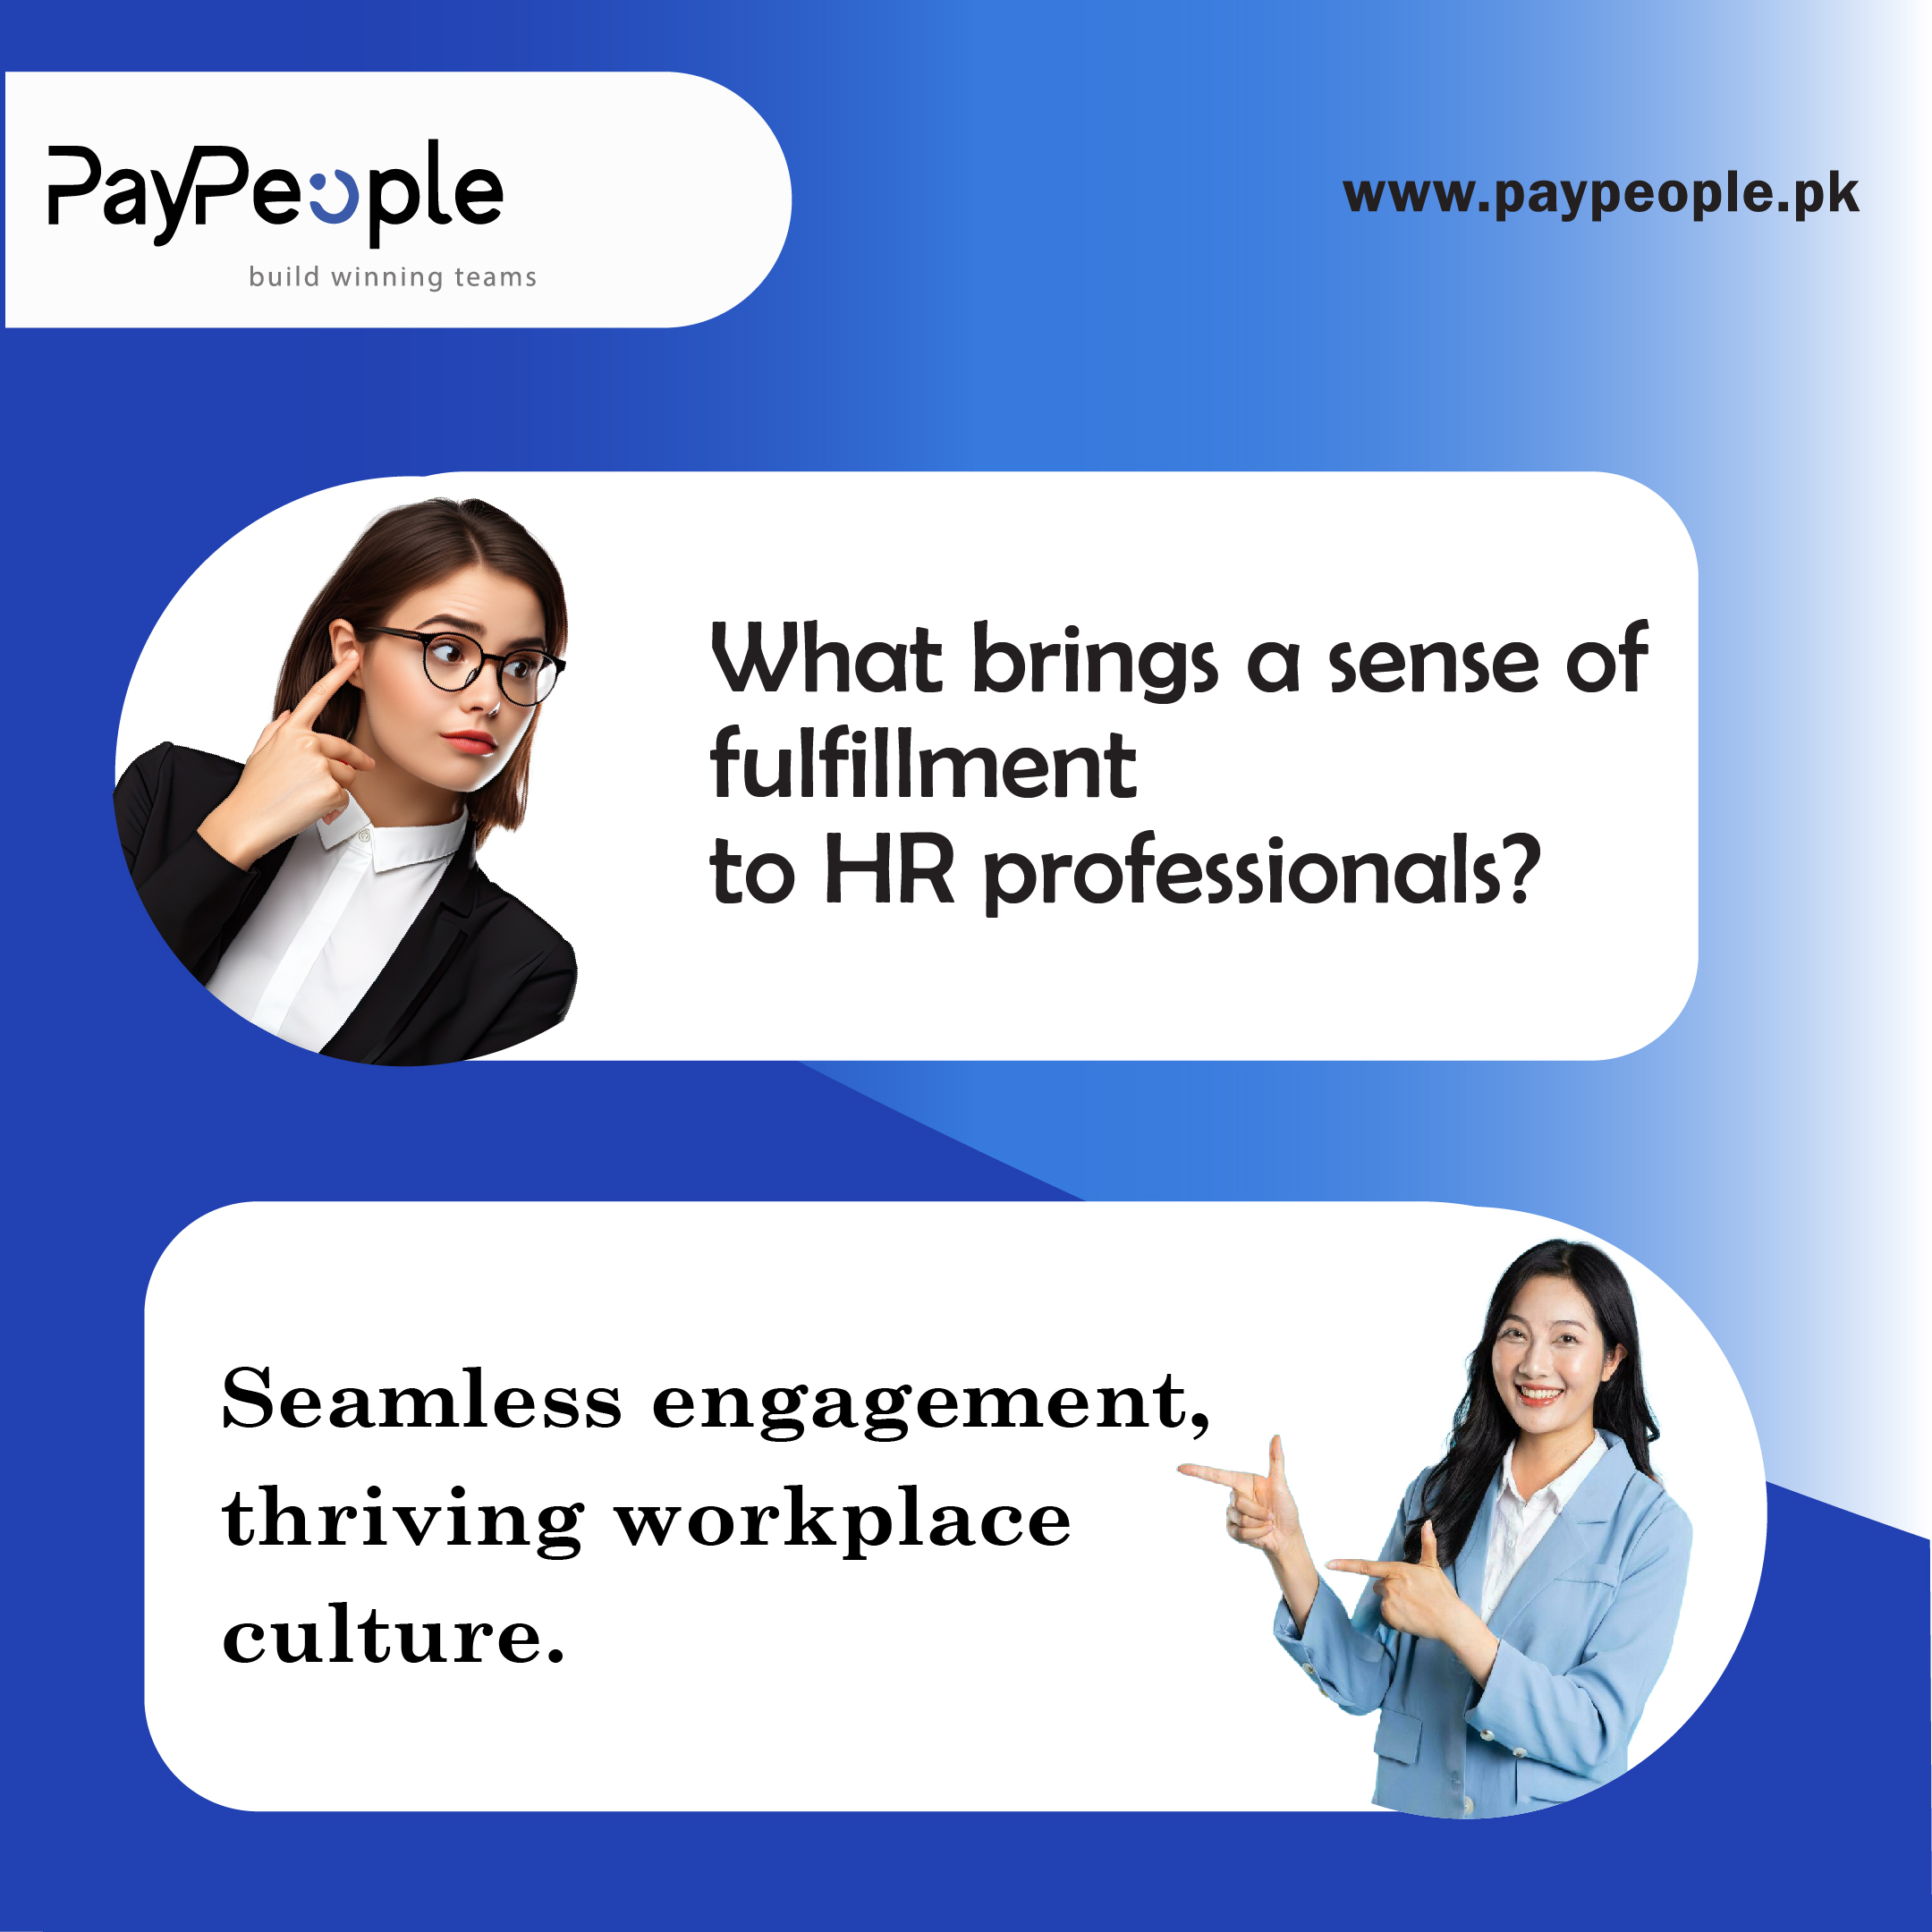 Can Payroll Software integrate with other HR?